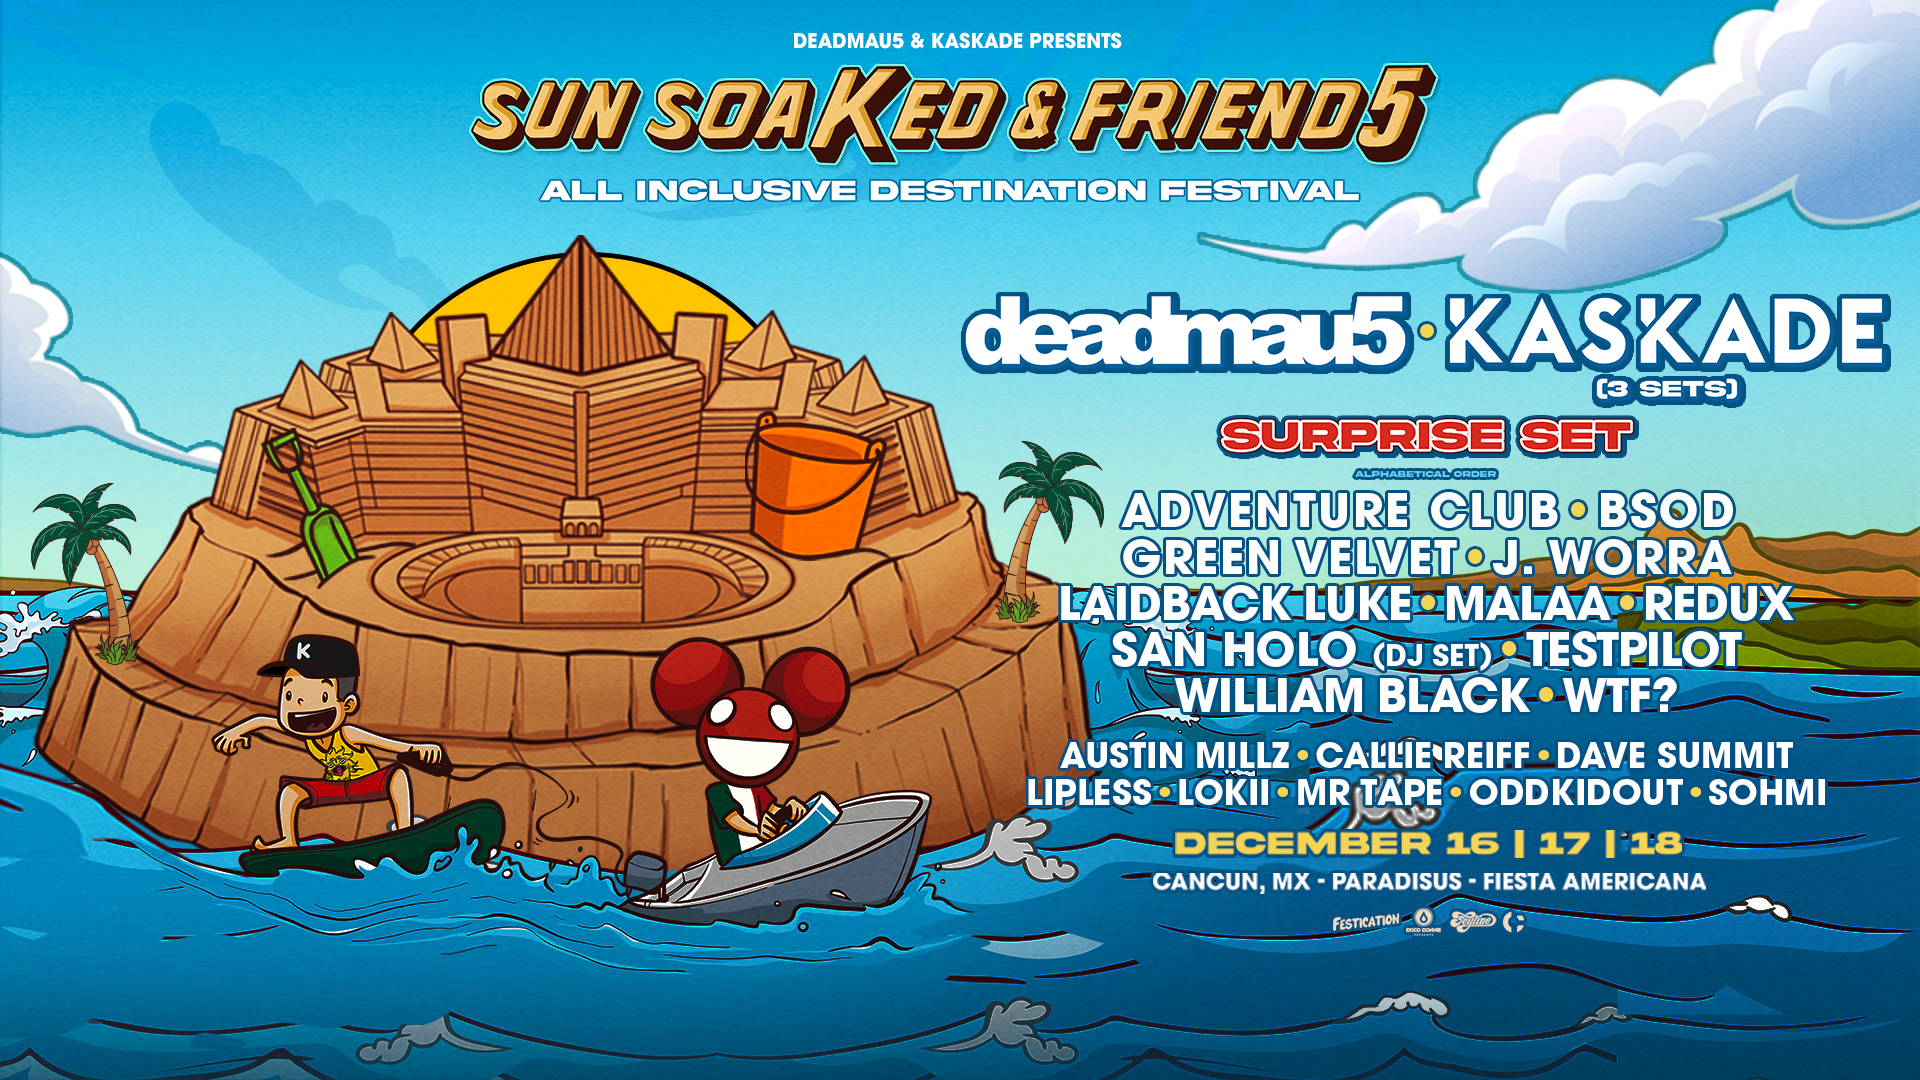 Kaskade’s Sun SoaKed, deadmau5’s We Are Friends Festivals and Festication Team Up For Combined Destination Festival: Sun SoaKed & Friend5 